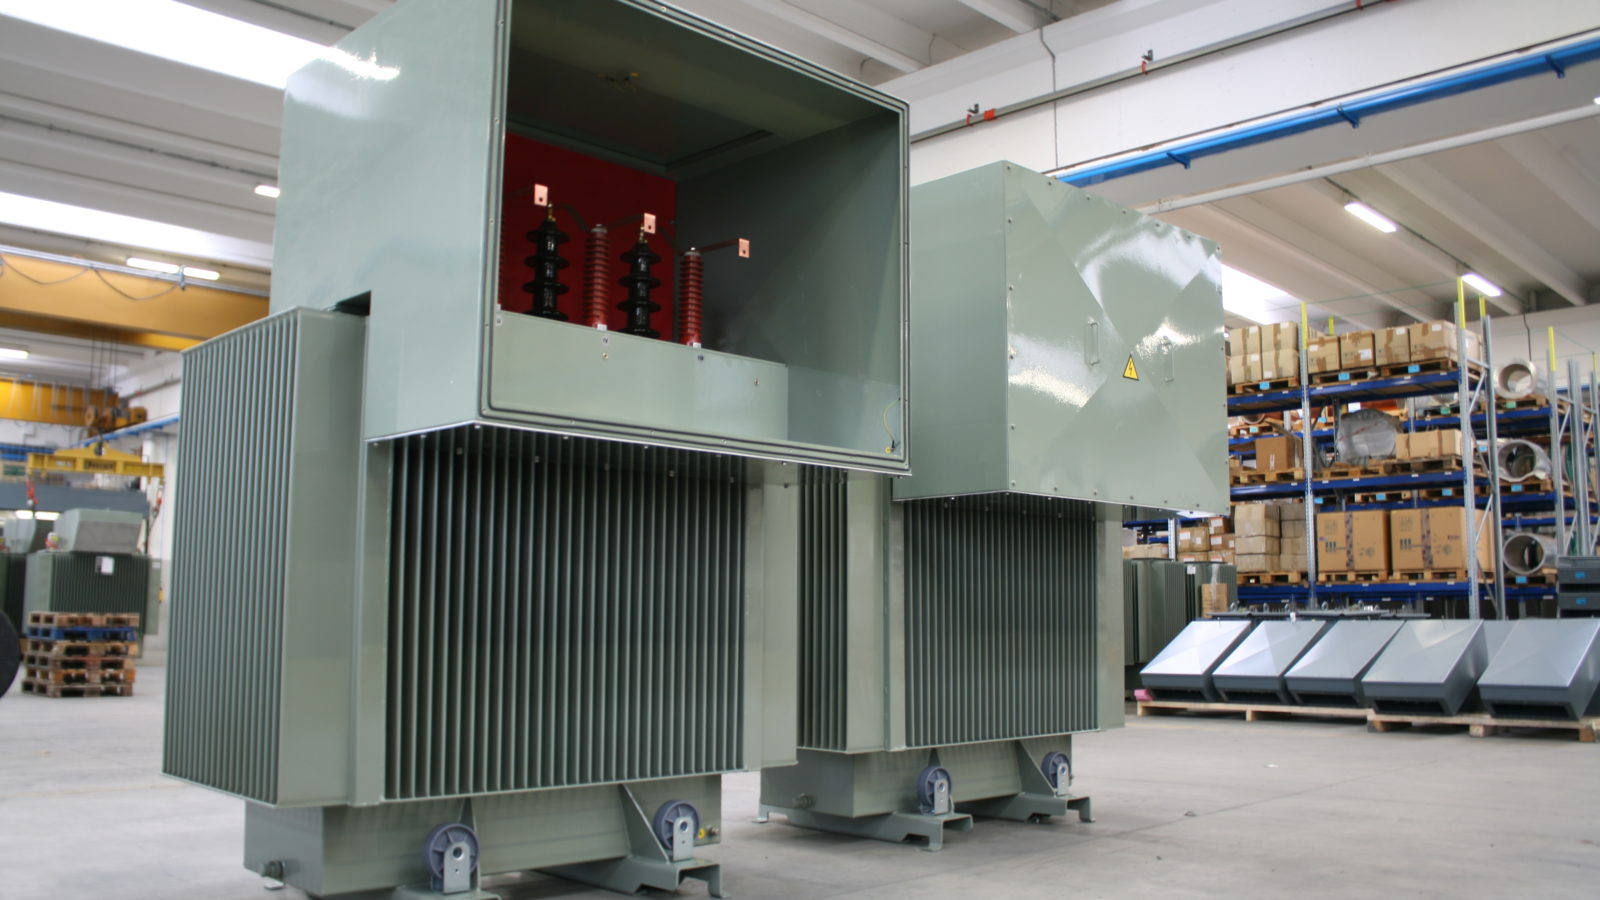 1500kVA transformers with MV and LV cable boxes